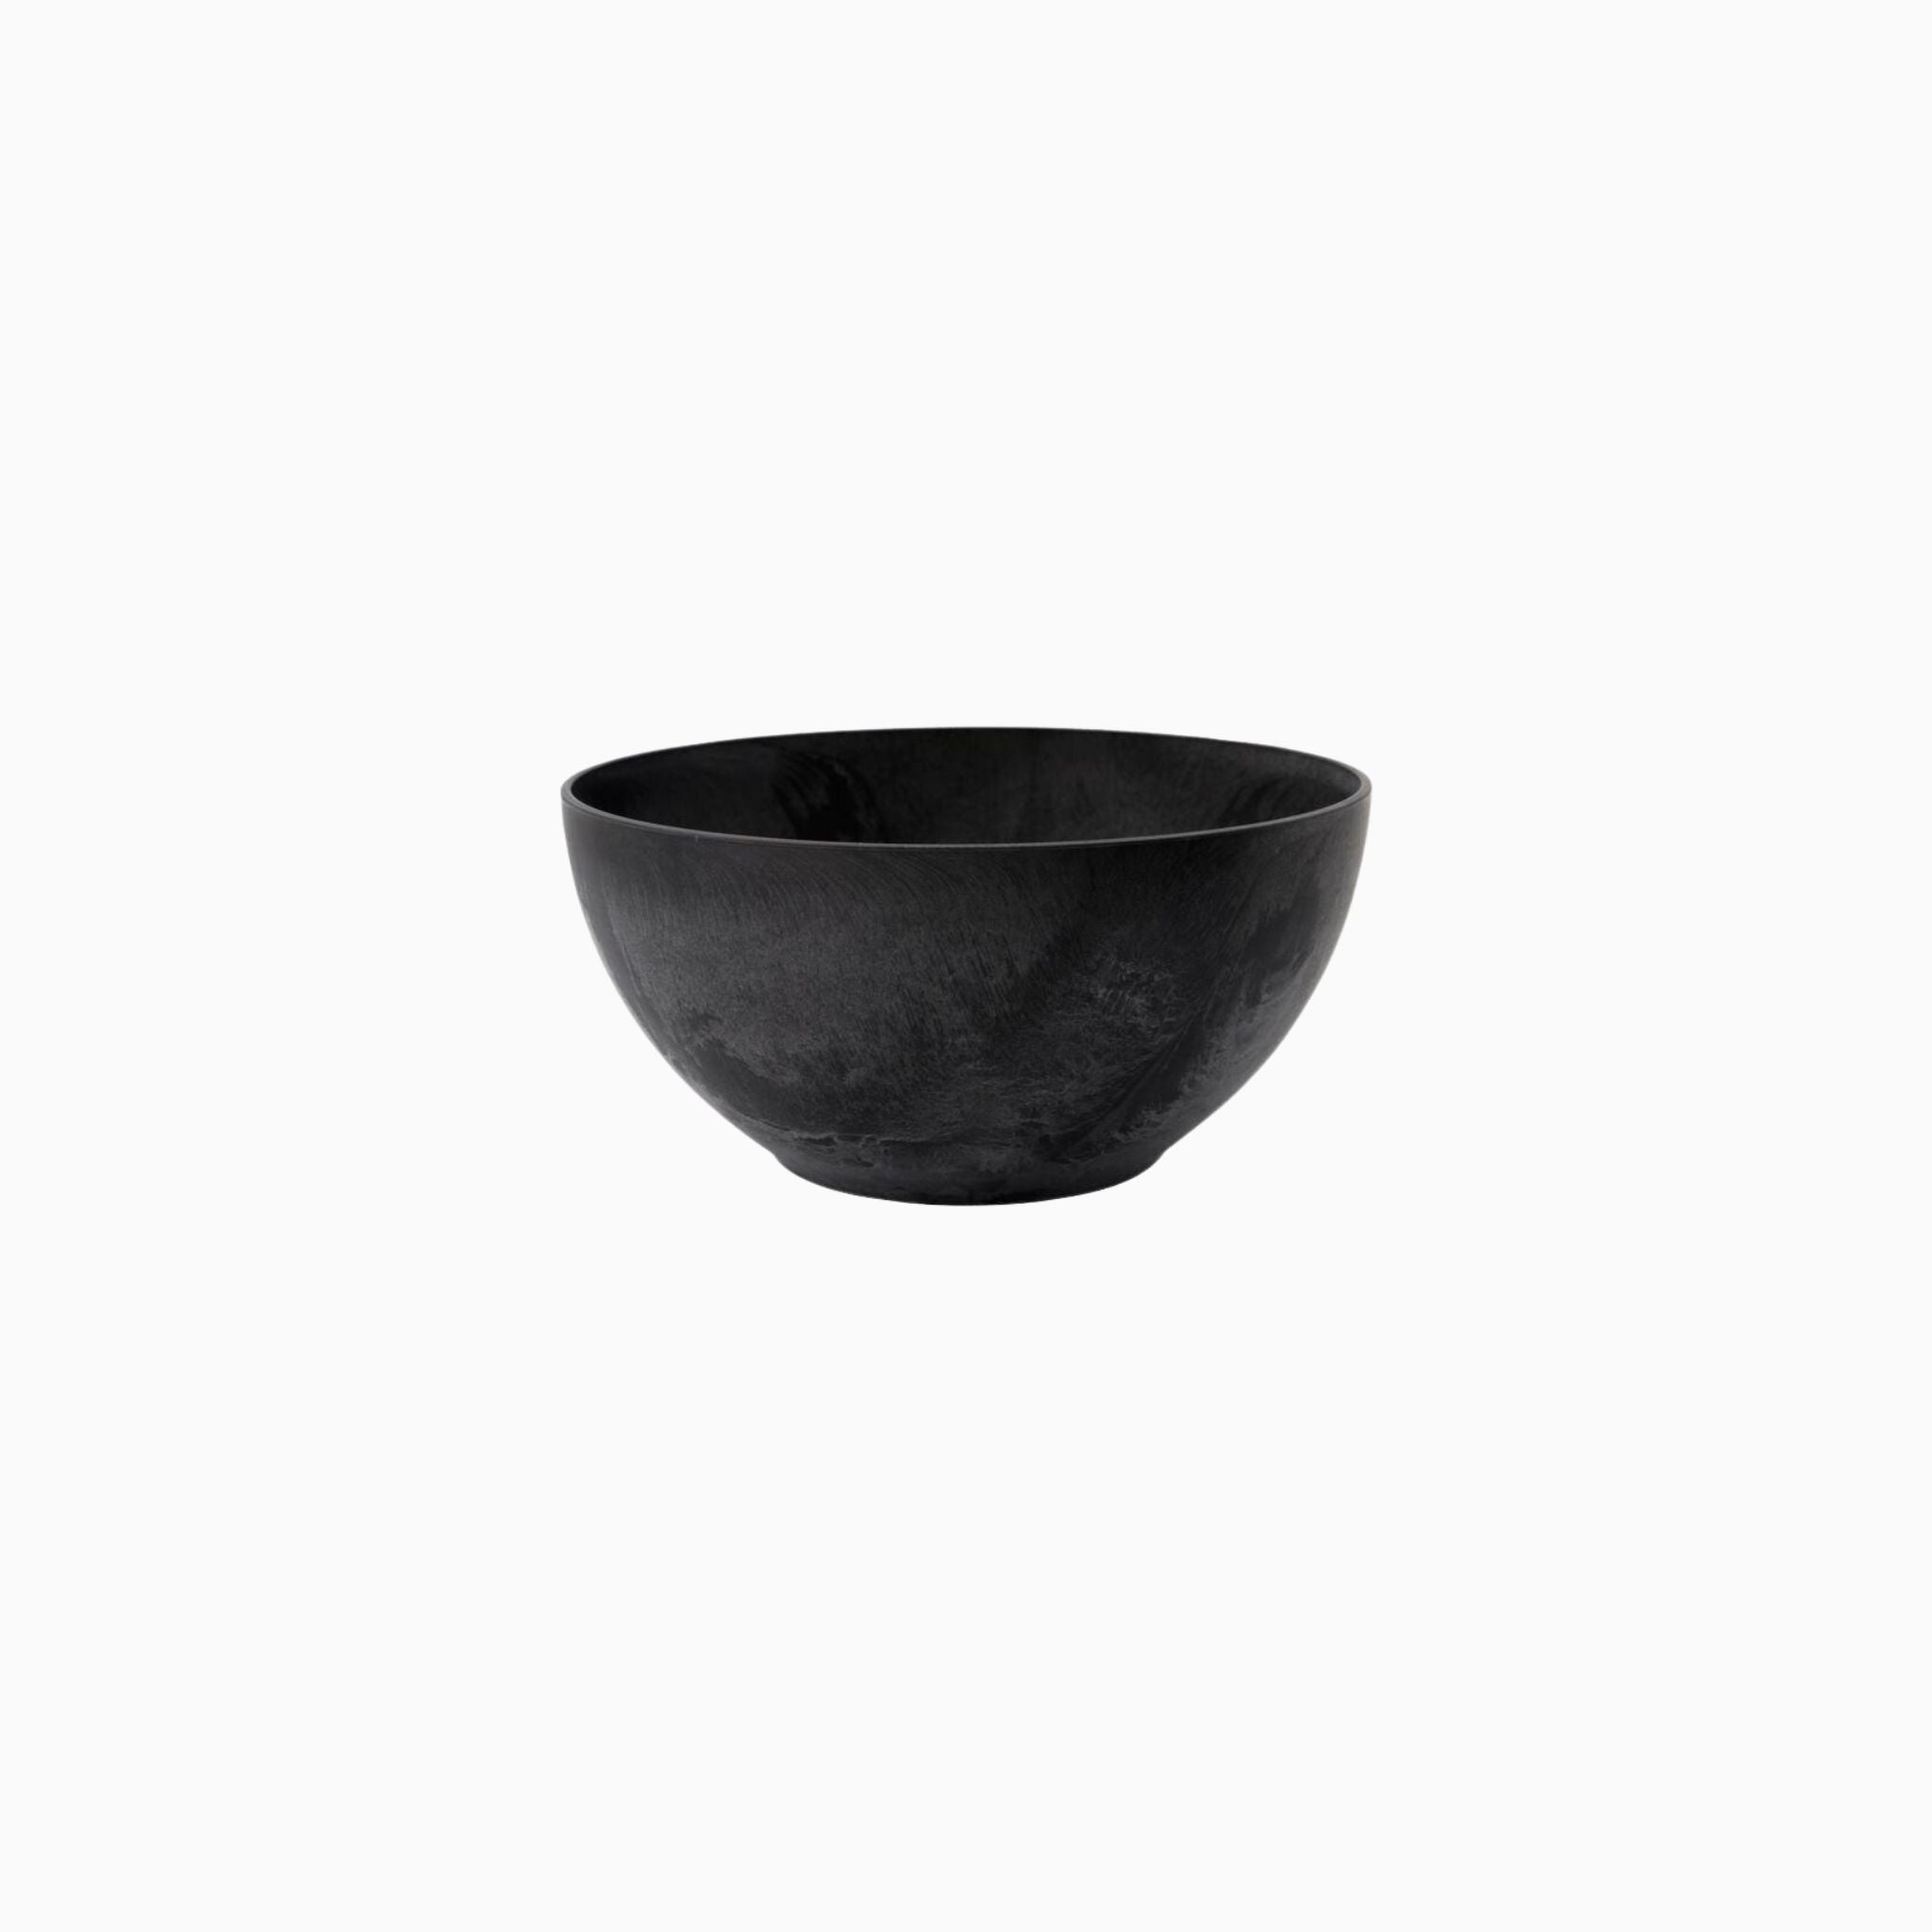 BLACK SERVING BOWL - Simply Elevated Home Furnishings 